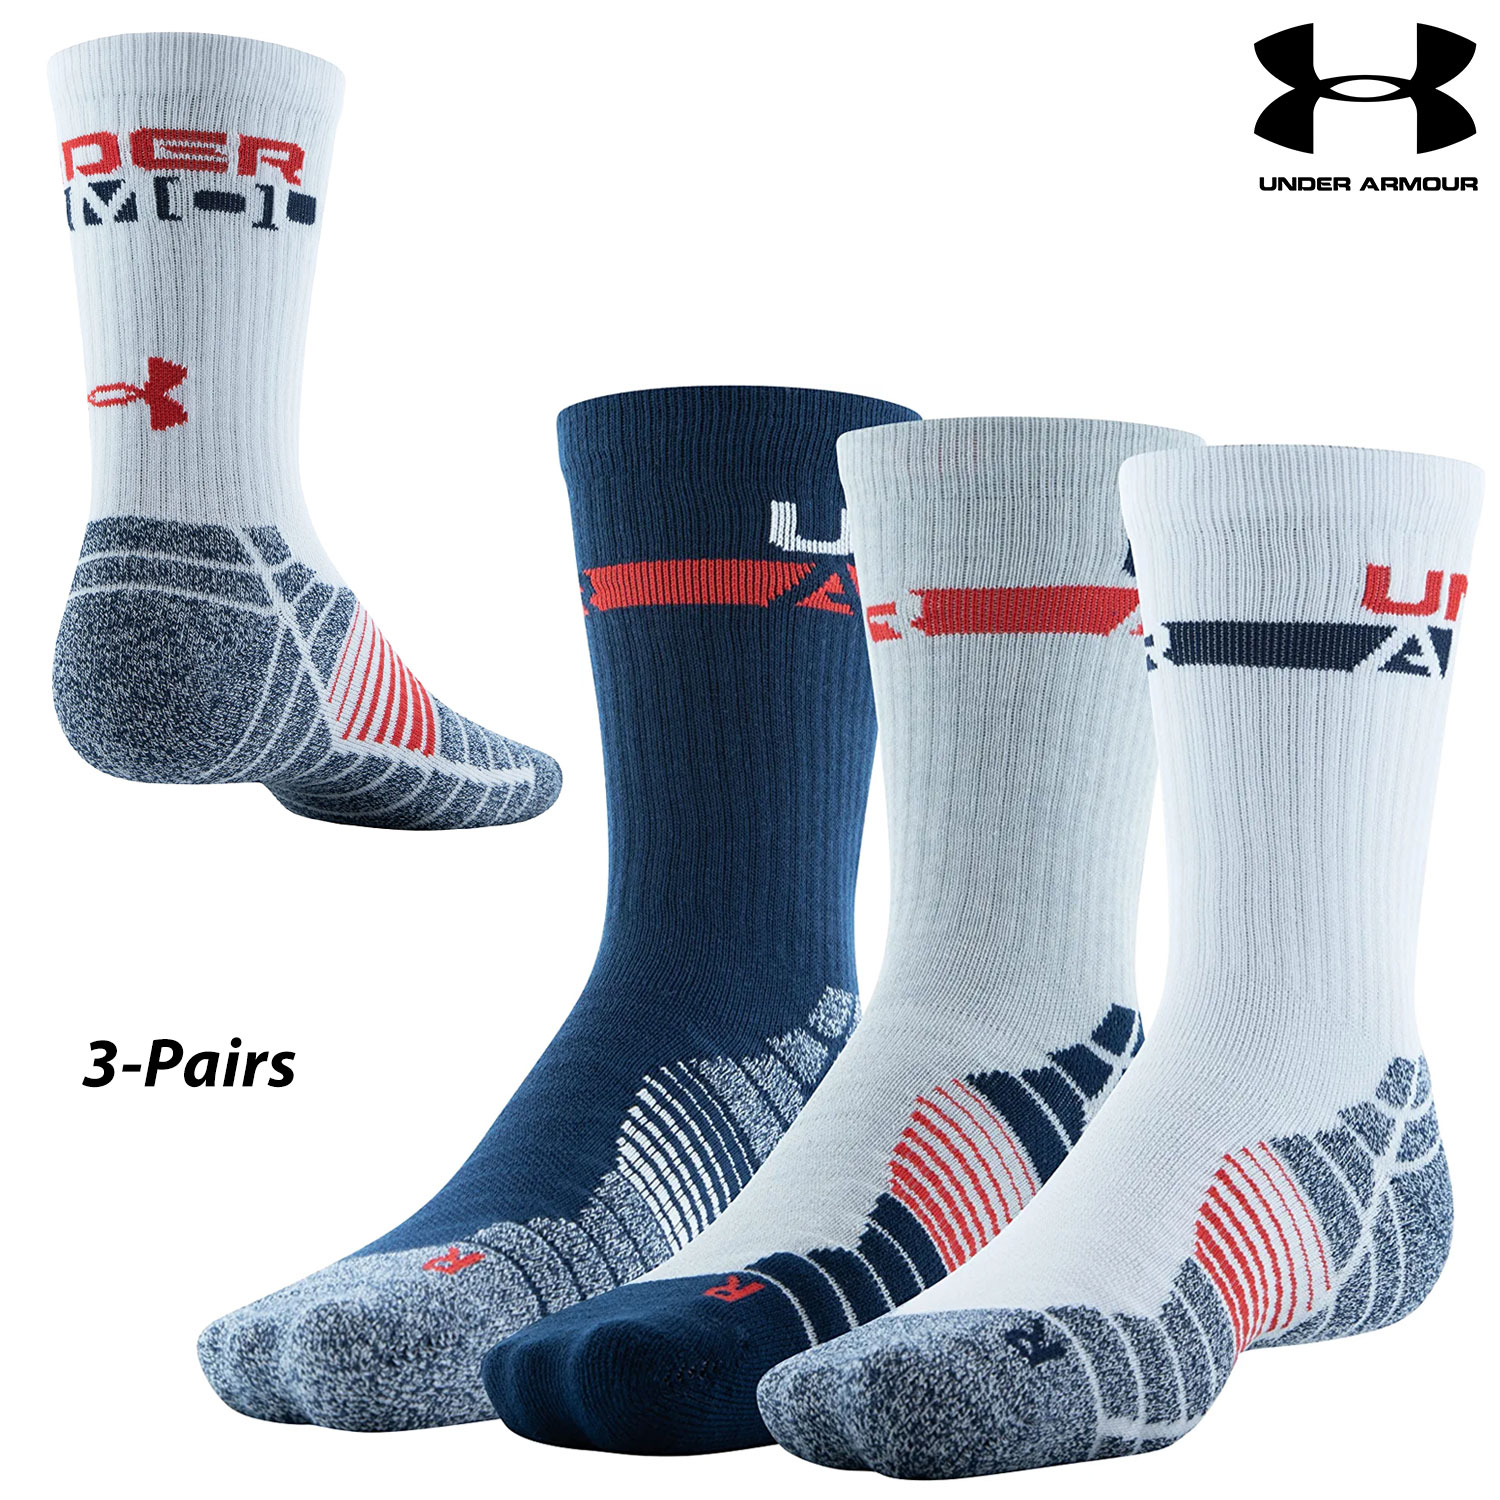 3 Pairs Under Armour Elevated Novelty Crew Socks (L)